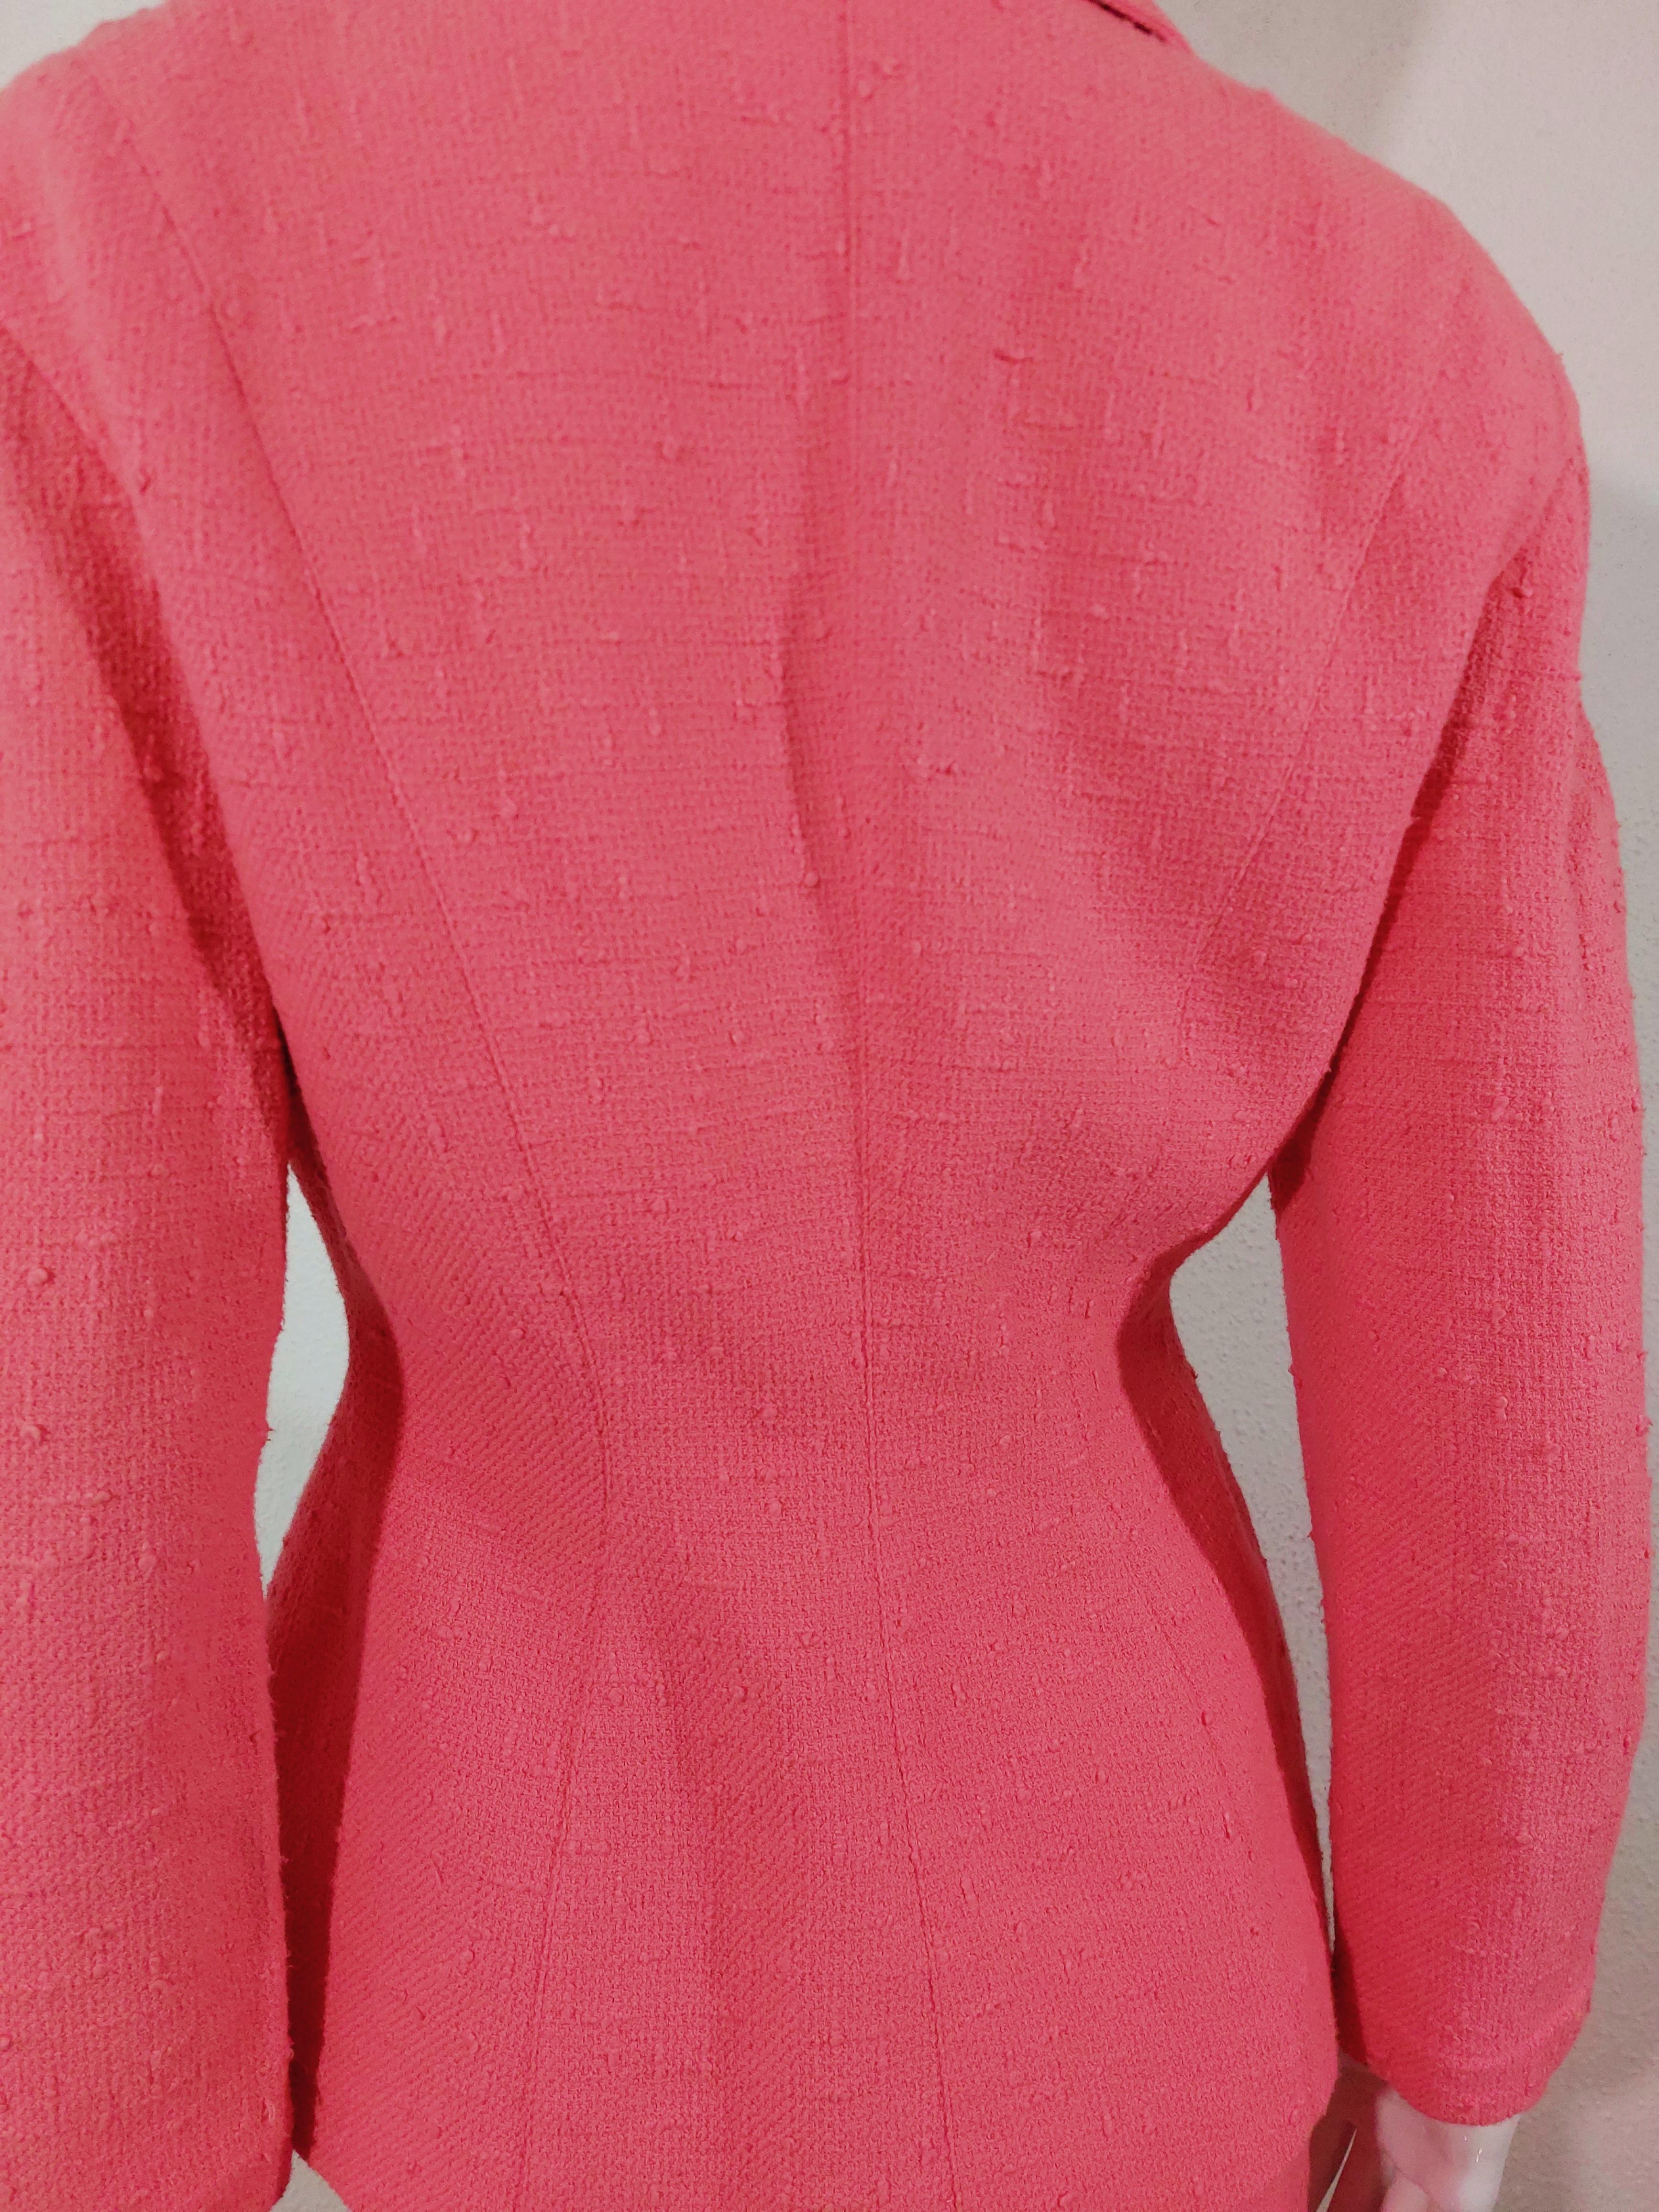 Thierry Mugler Couture Brooch FW 1990 Pin Pink Badge Blazer Skirt Suit Set For Sale 12